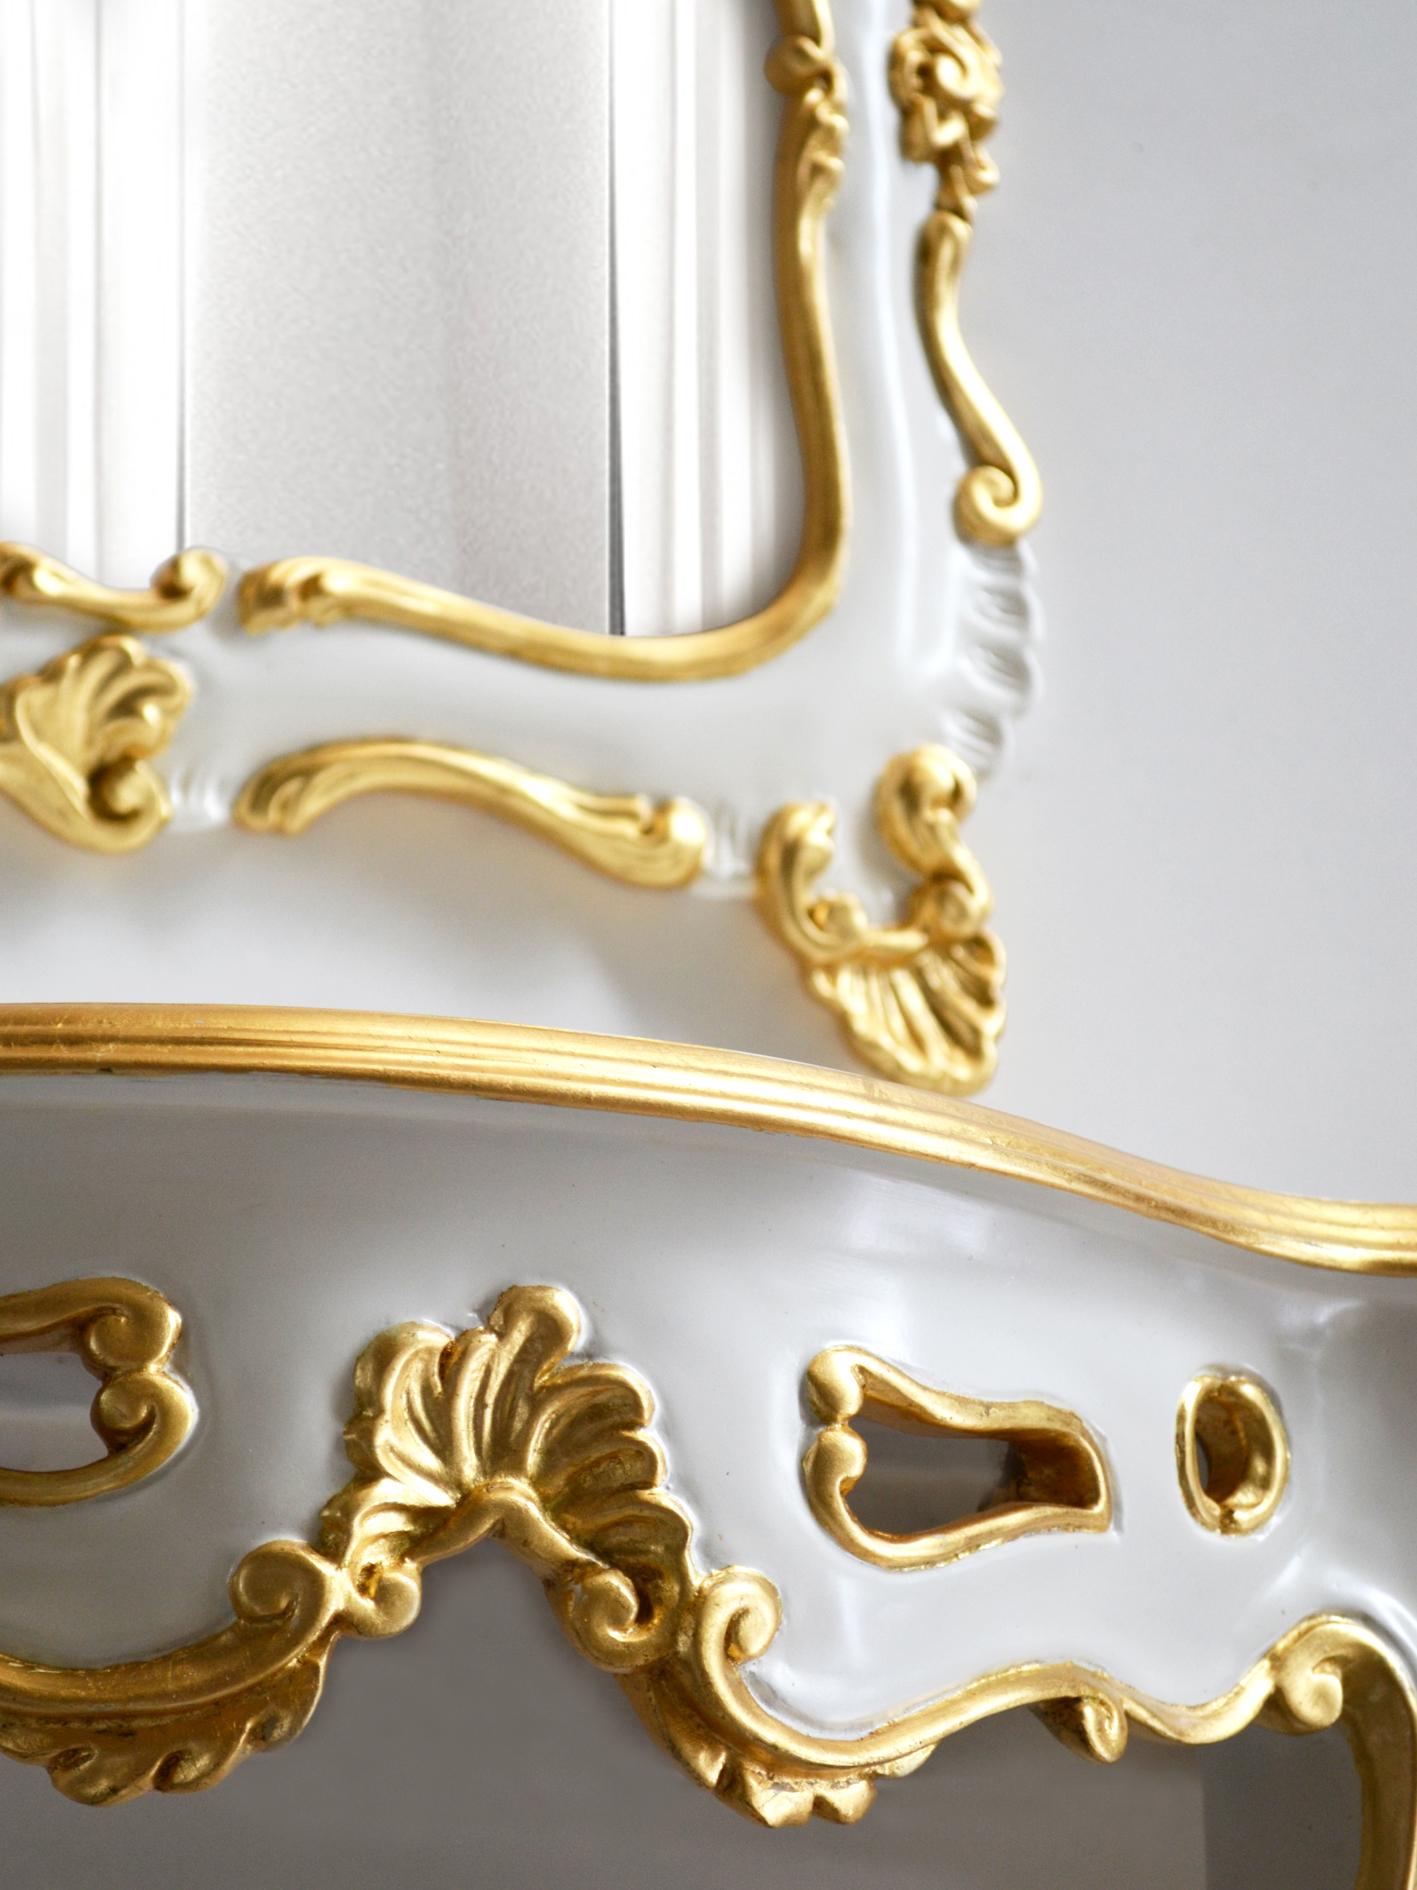 Baroque Console and mirror  handcarved in Italy by Cupioli gold leaf details available For Sale